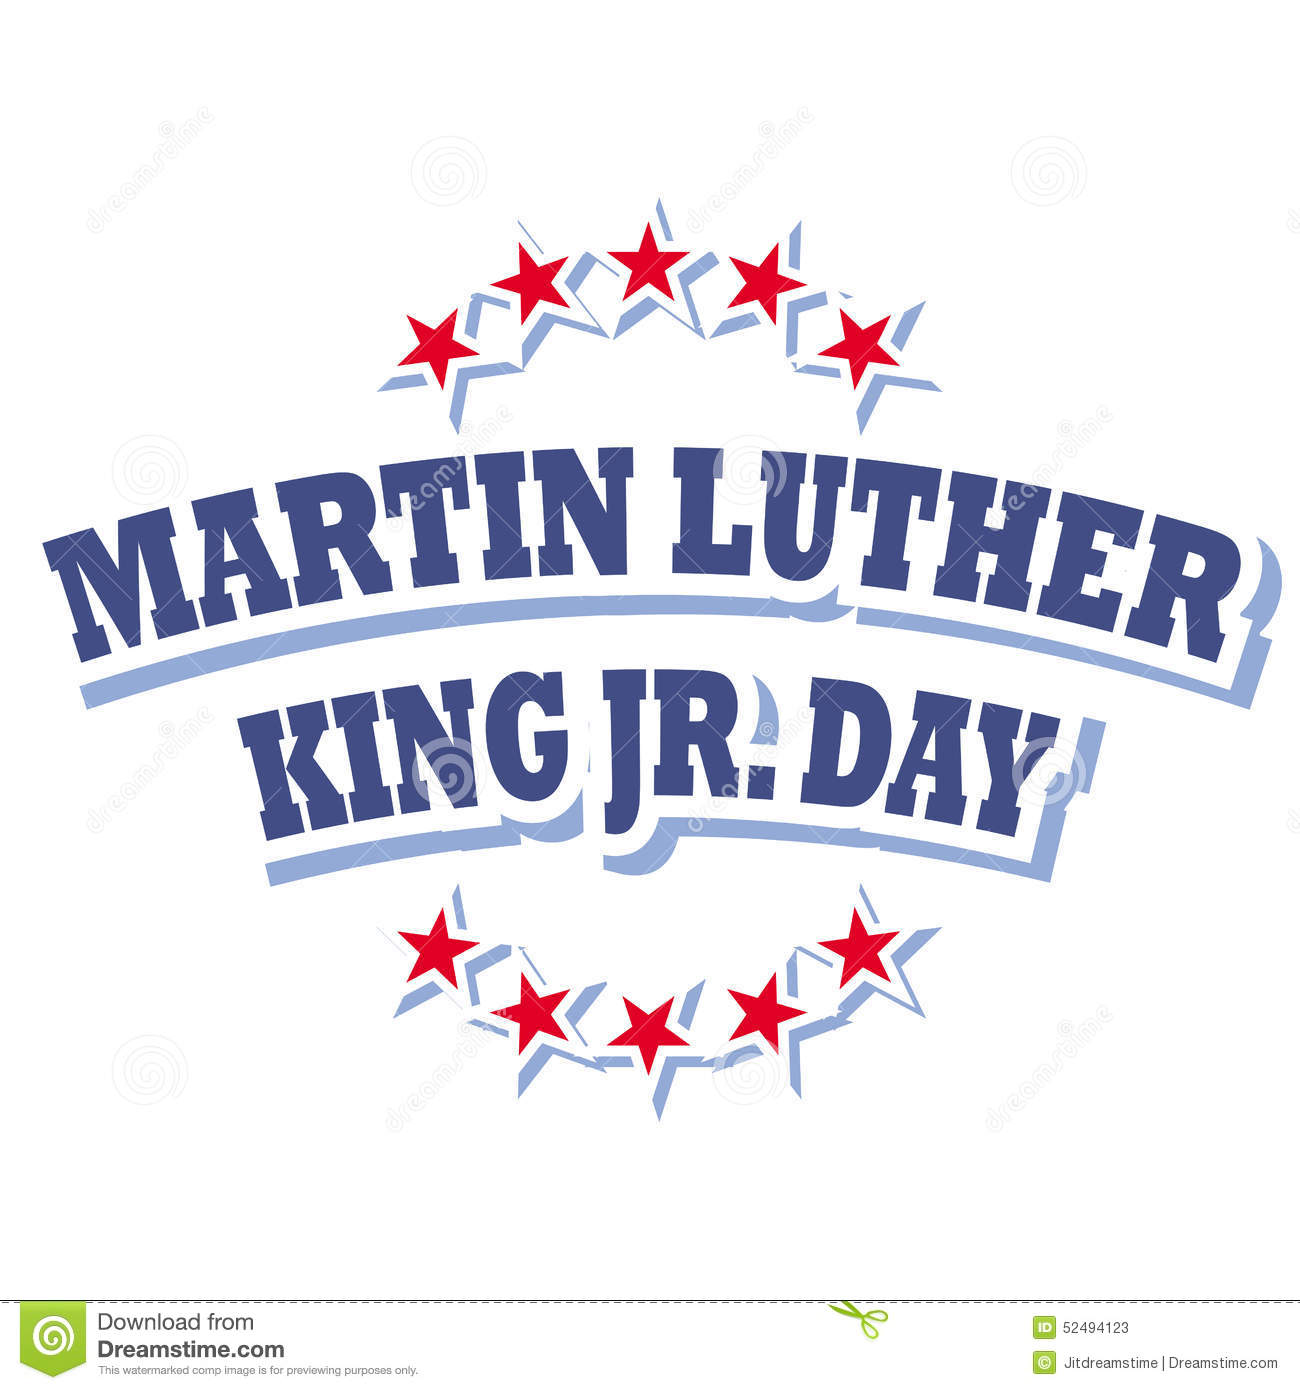 Martin Luther King Day with .